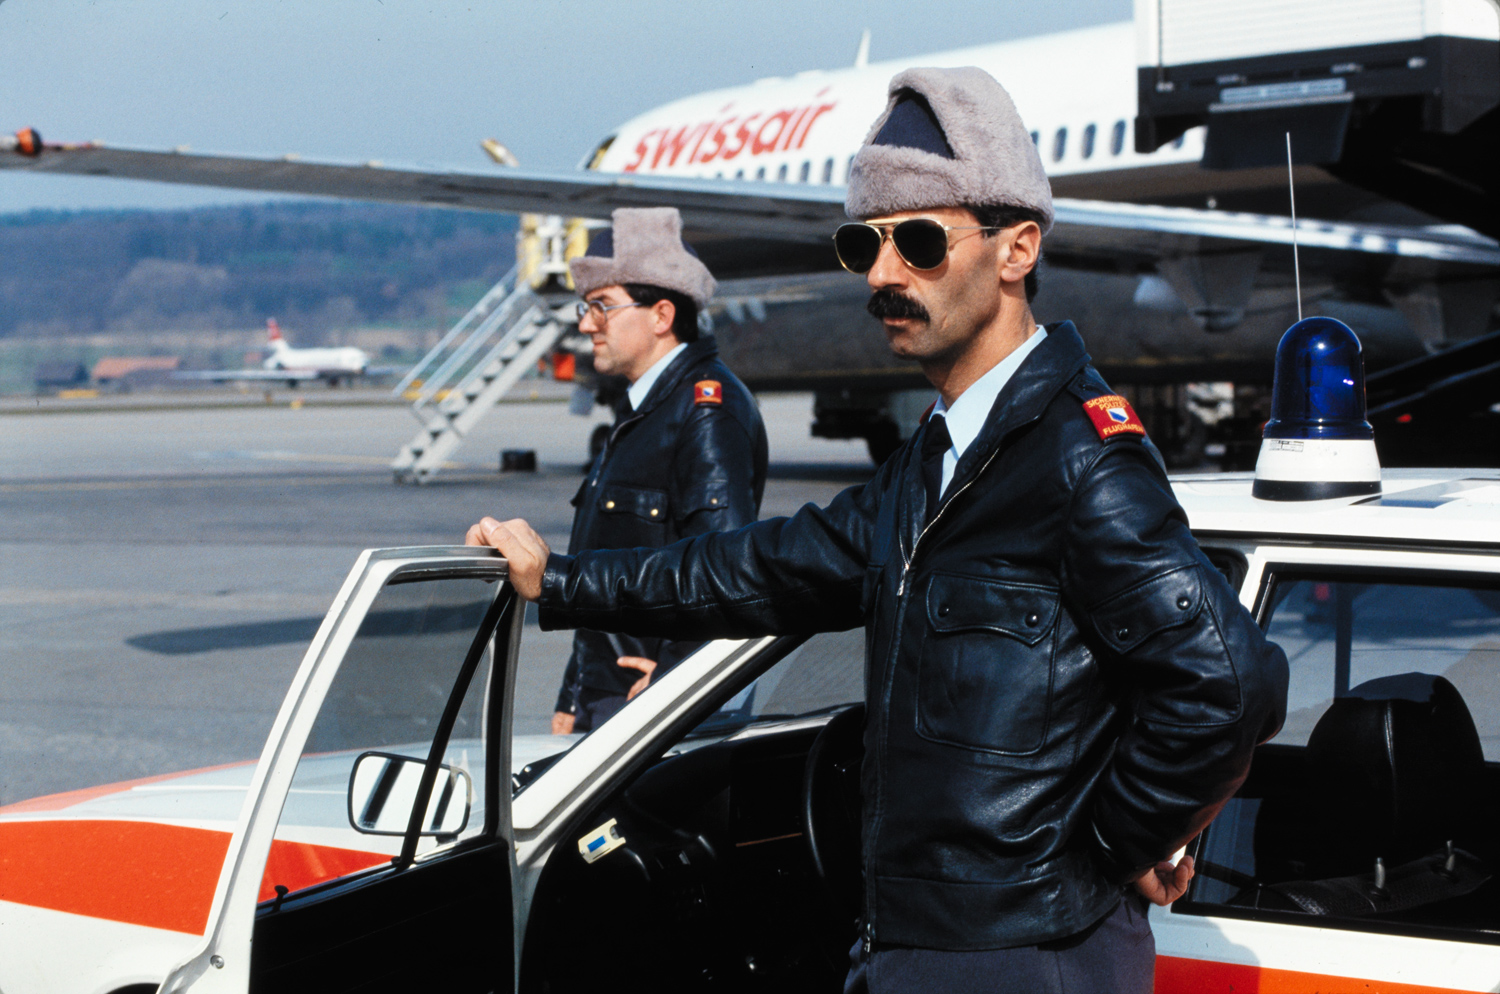 Airport police on the airfield, 1985.